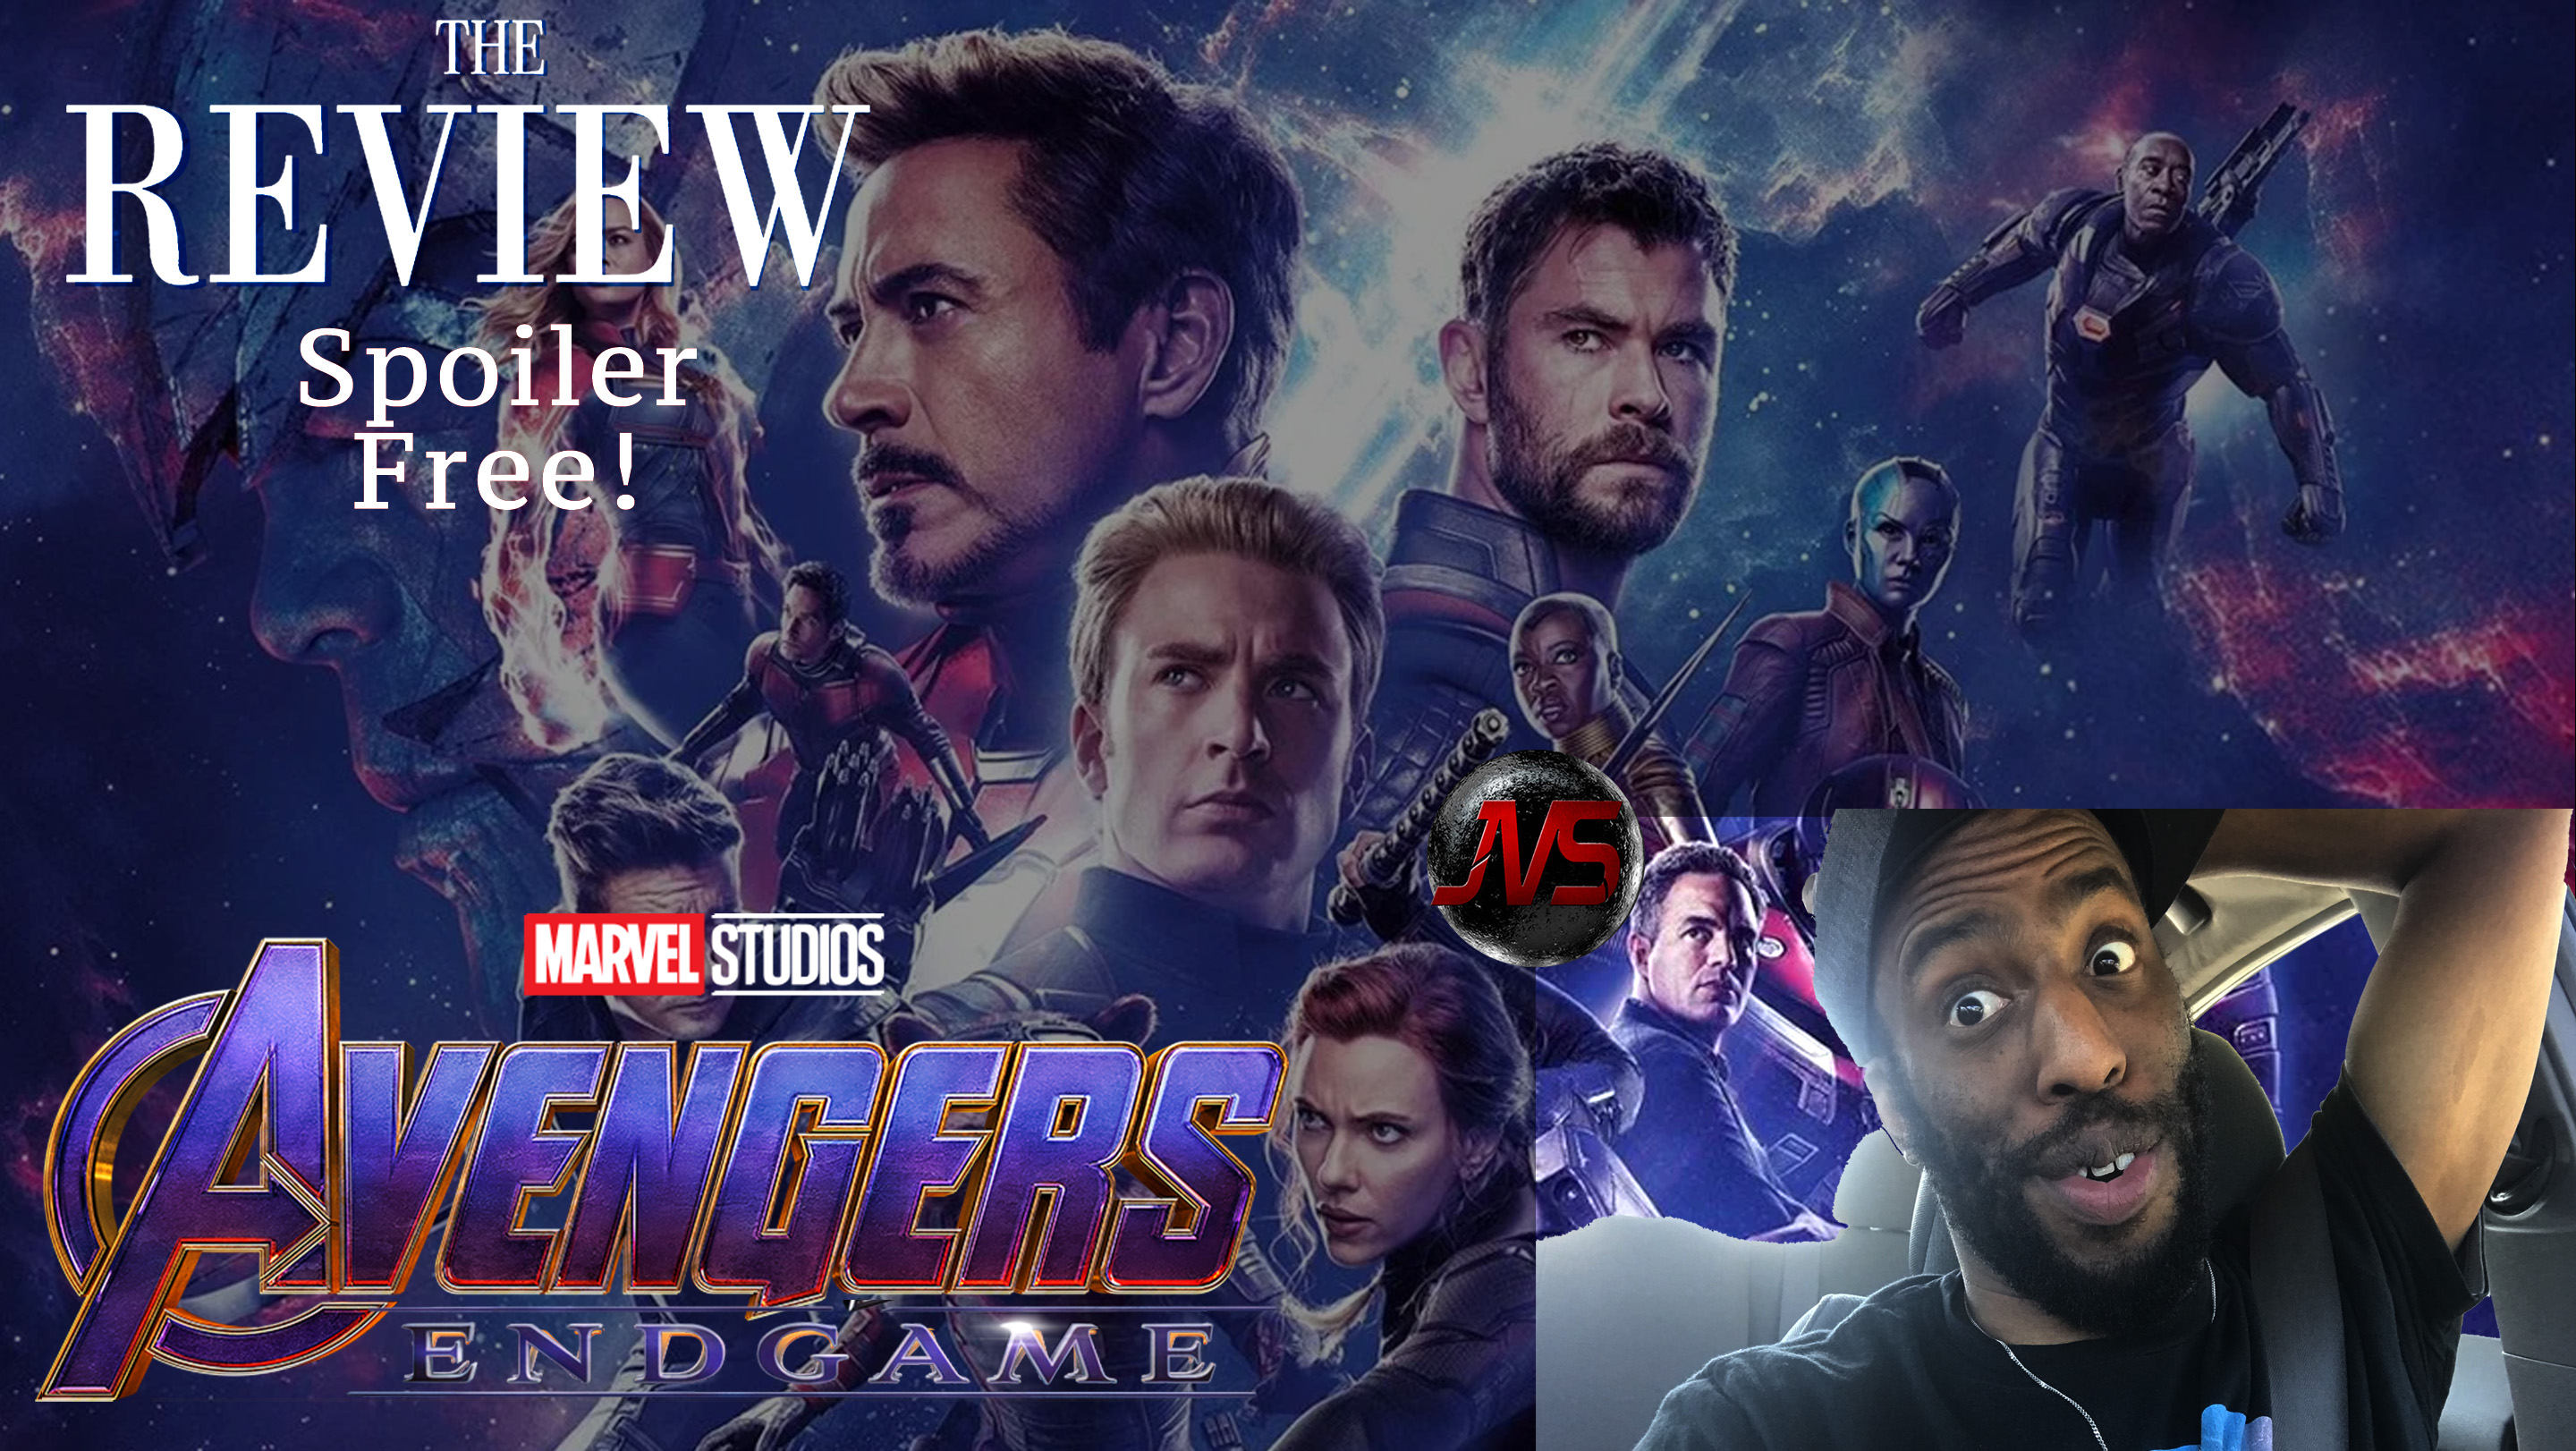 write a movie review of avengers endgame